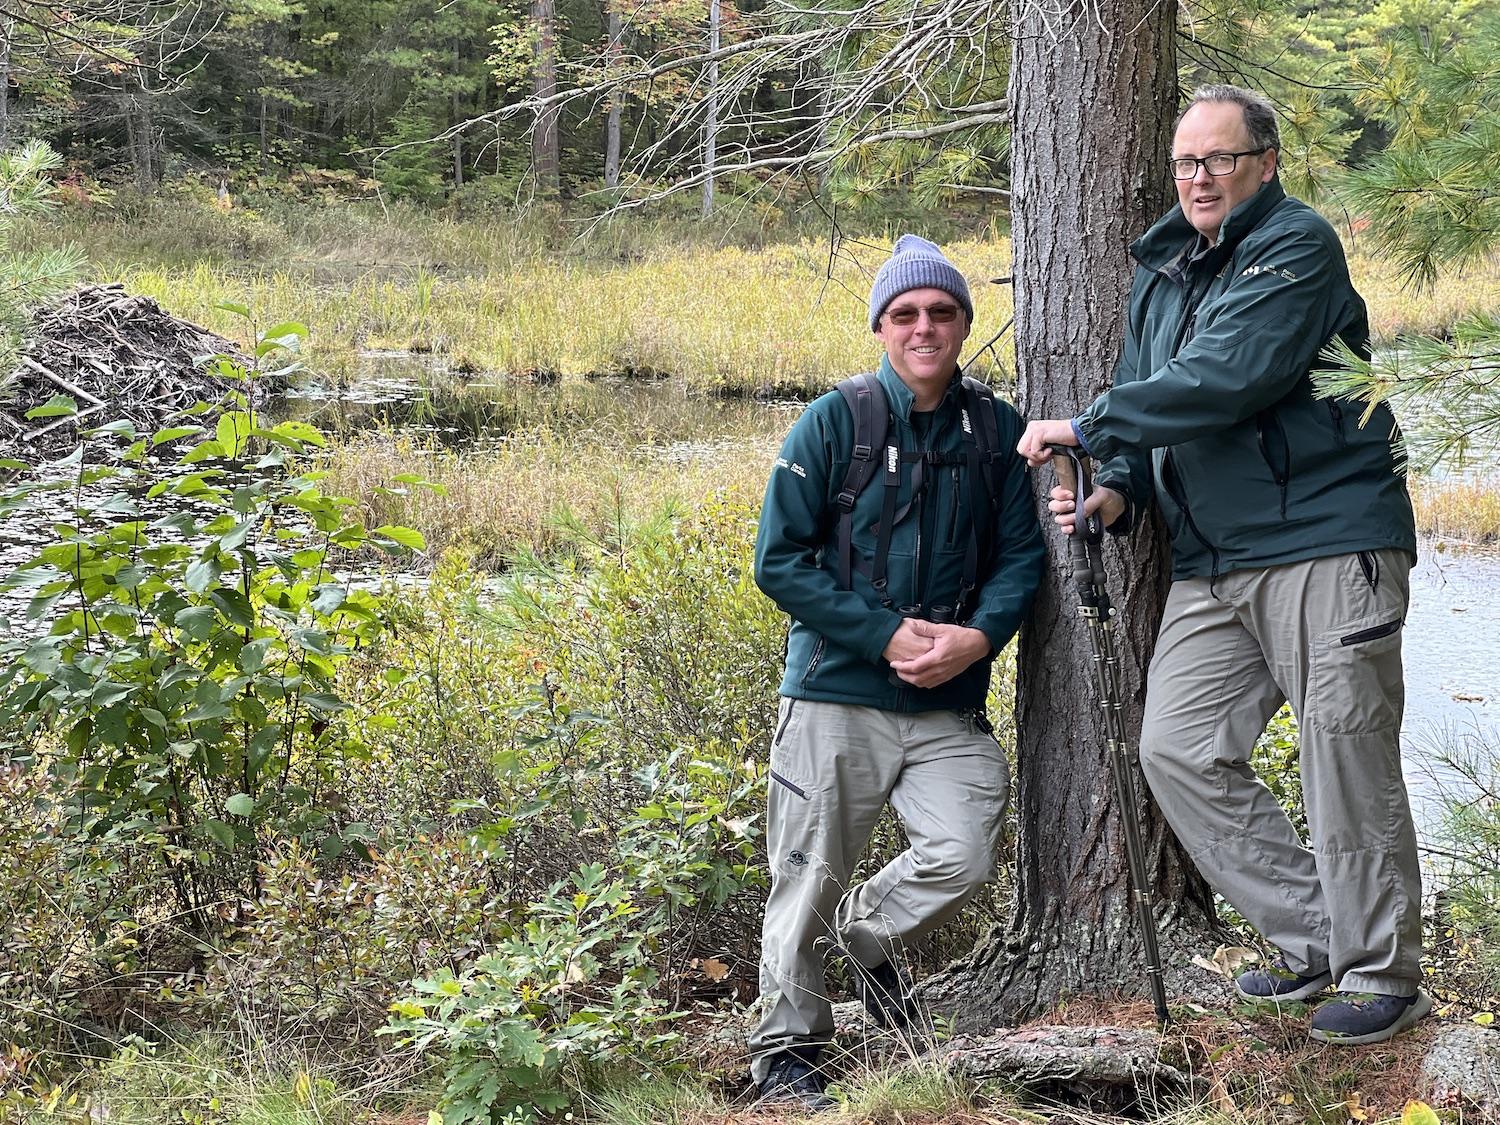 Parks Canada's Mike Lavin, left, and Andrew Promaine, right, stand along the Massasauga Trail at a wetland with a beaver house.